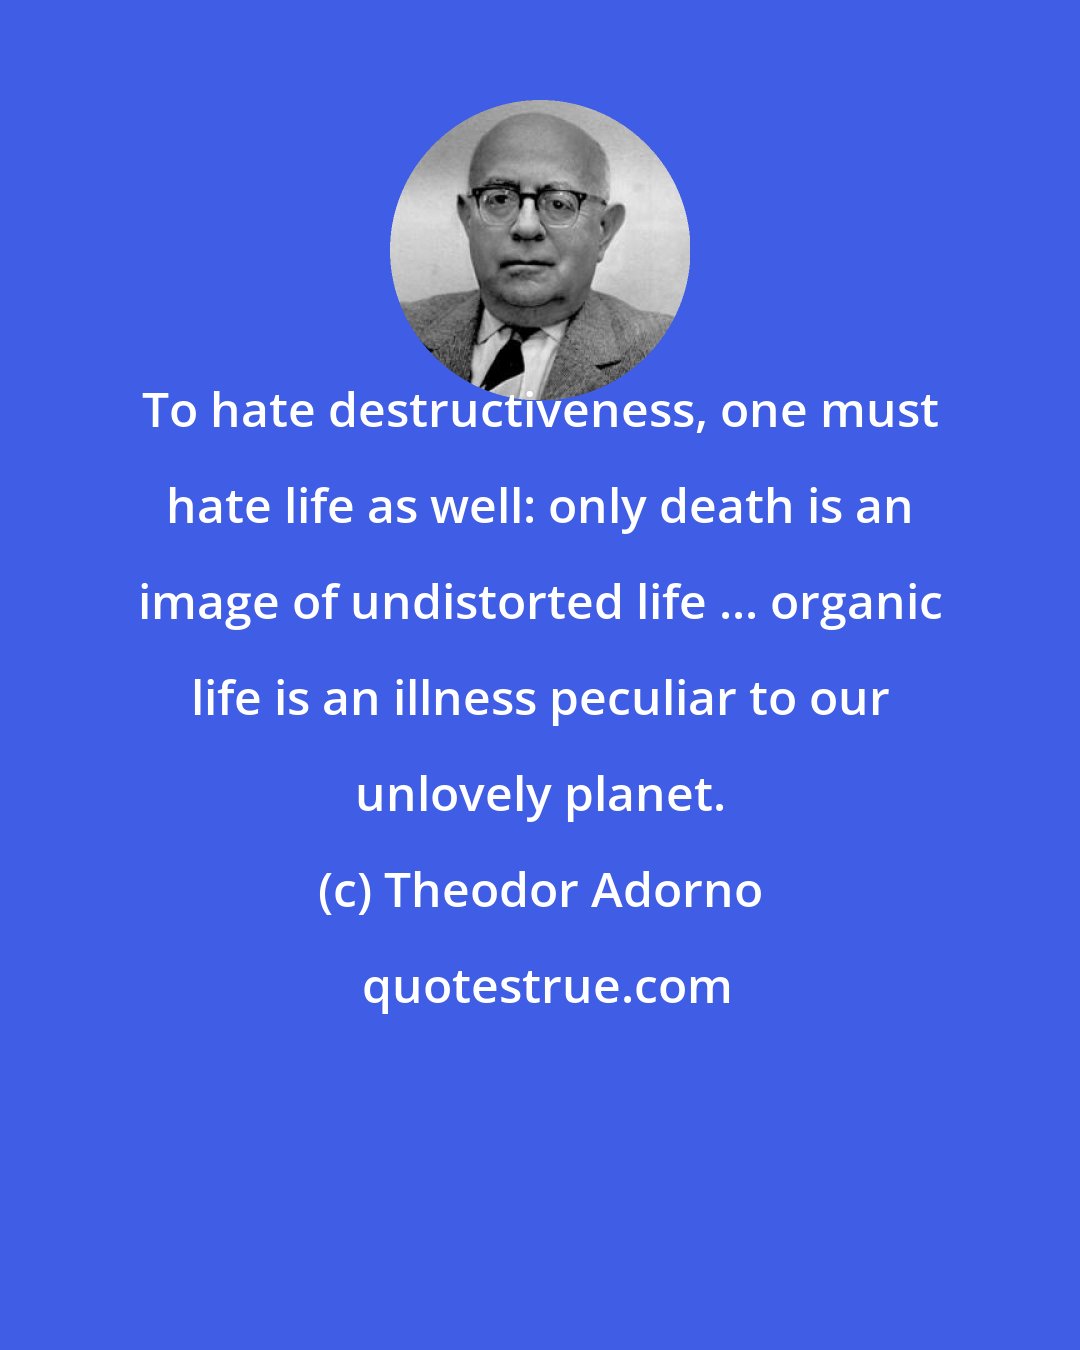 Theodor Adorno: To hate destructiveness, one must hate life as well: only death is an image of undistorted life ... organic life is an illness peculiar to our unlovely planet.